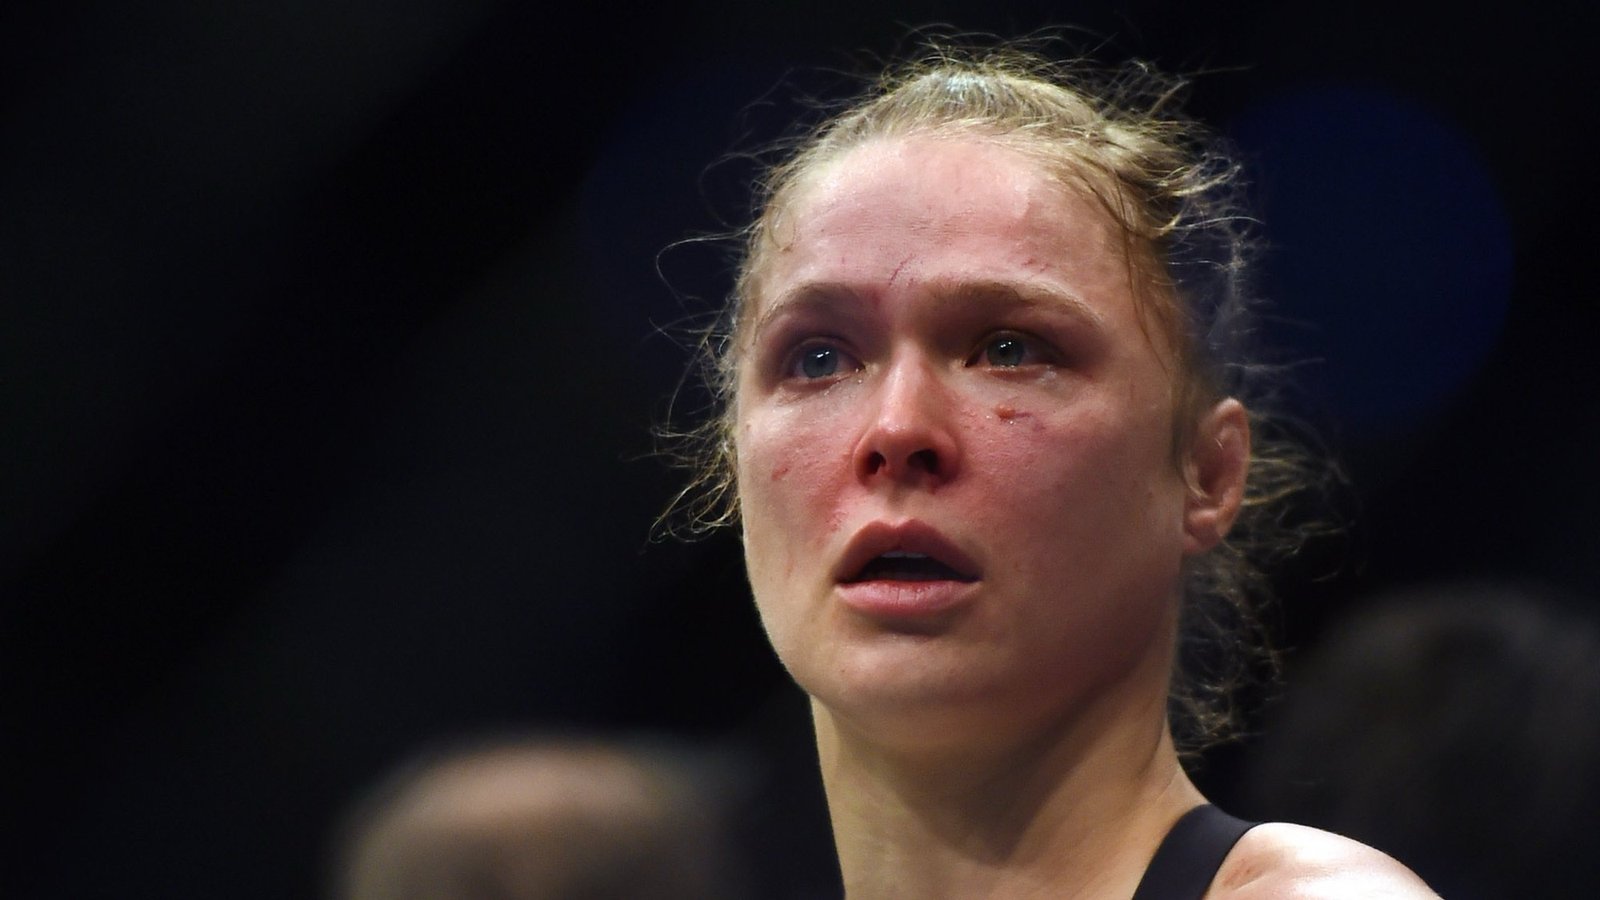 Ronda Rousey, former UFC bantamweight champion, allegedly concealed concussions and neurological injuries.